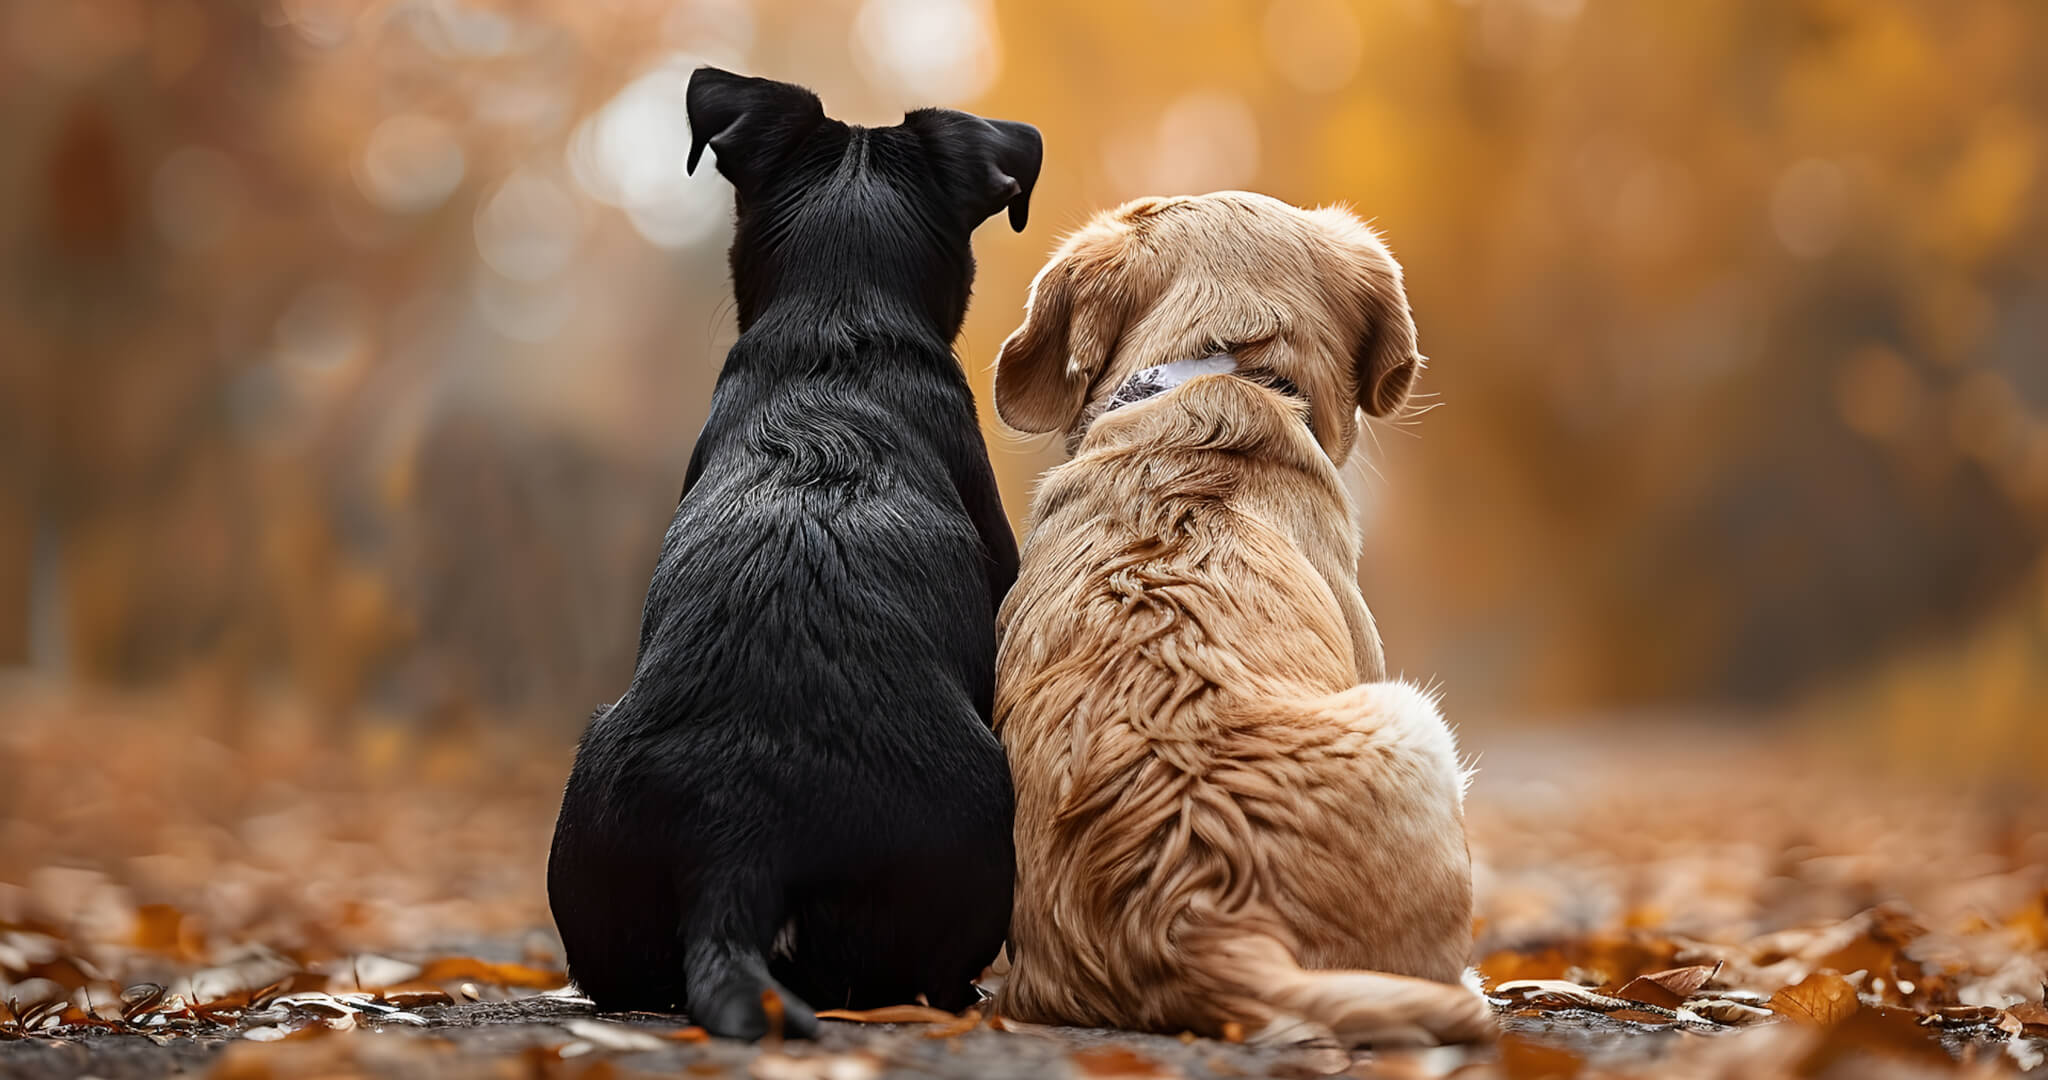 two-dogs-sitting-together-outside-image-with-text-why-choose-great-dog-treats-chews